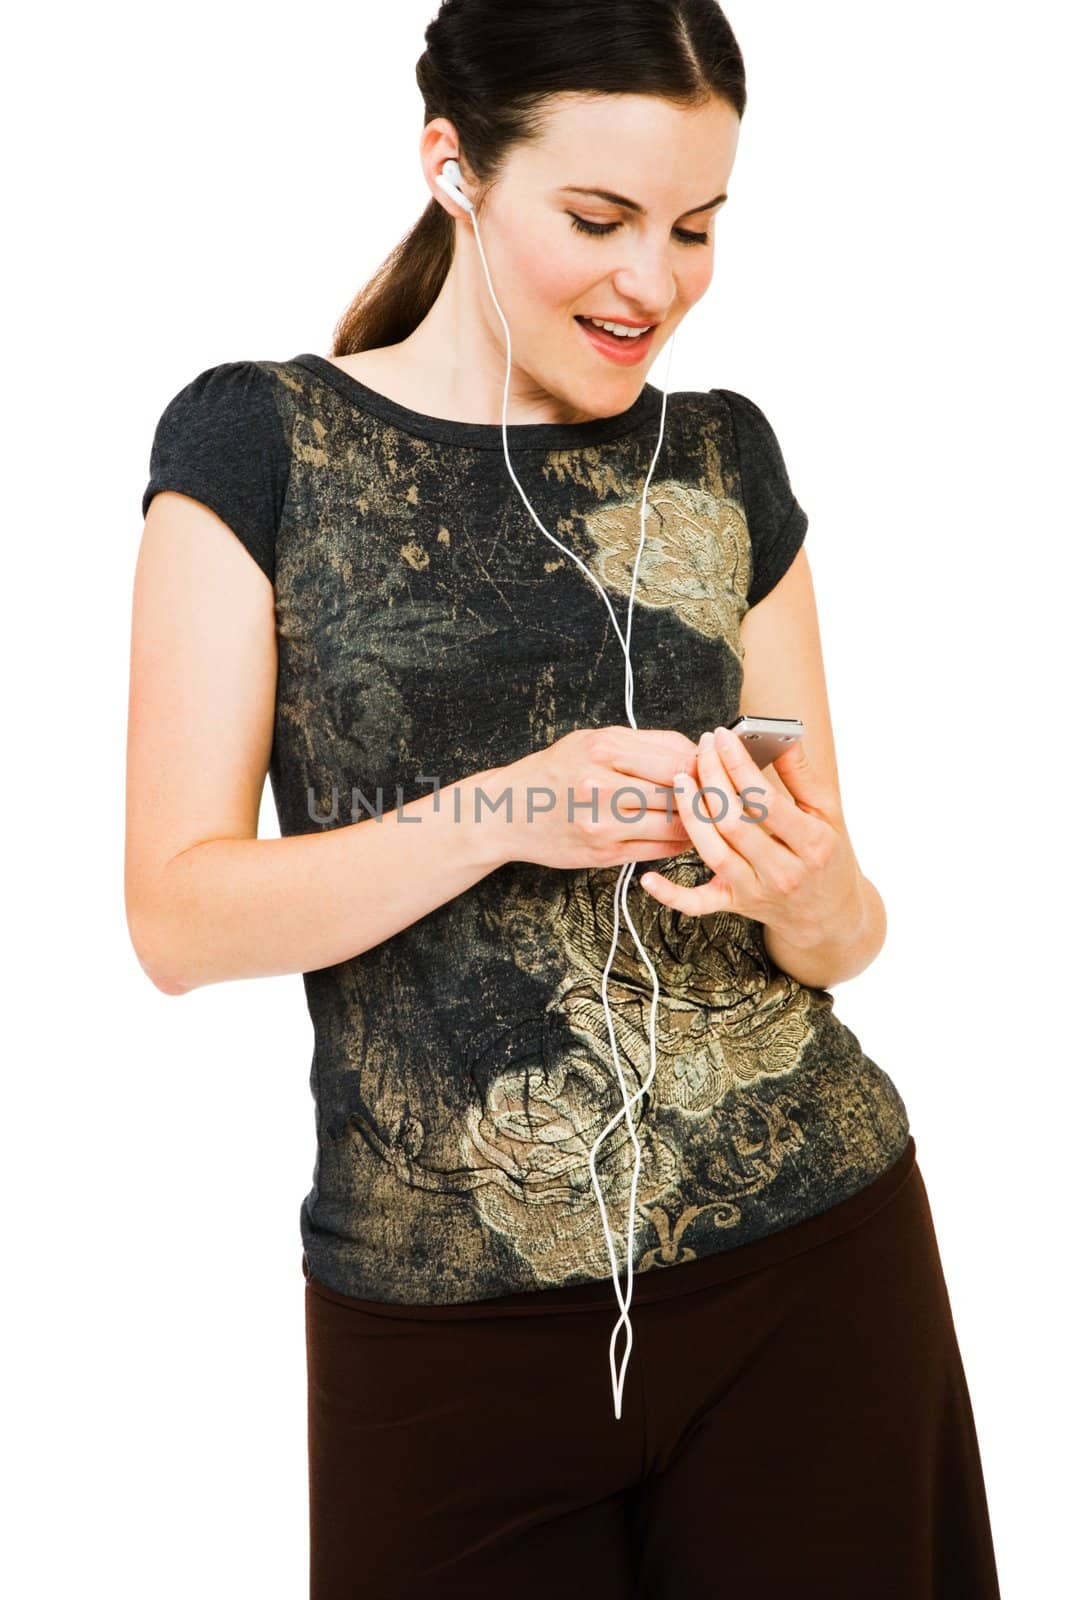 Smiling woman listening to music on MP3 player isolated over white